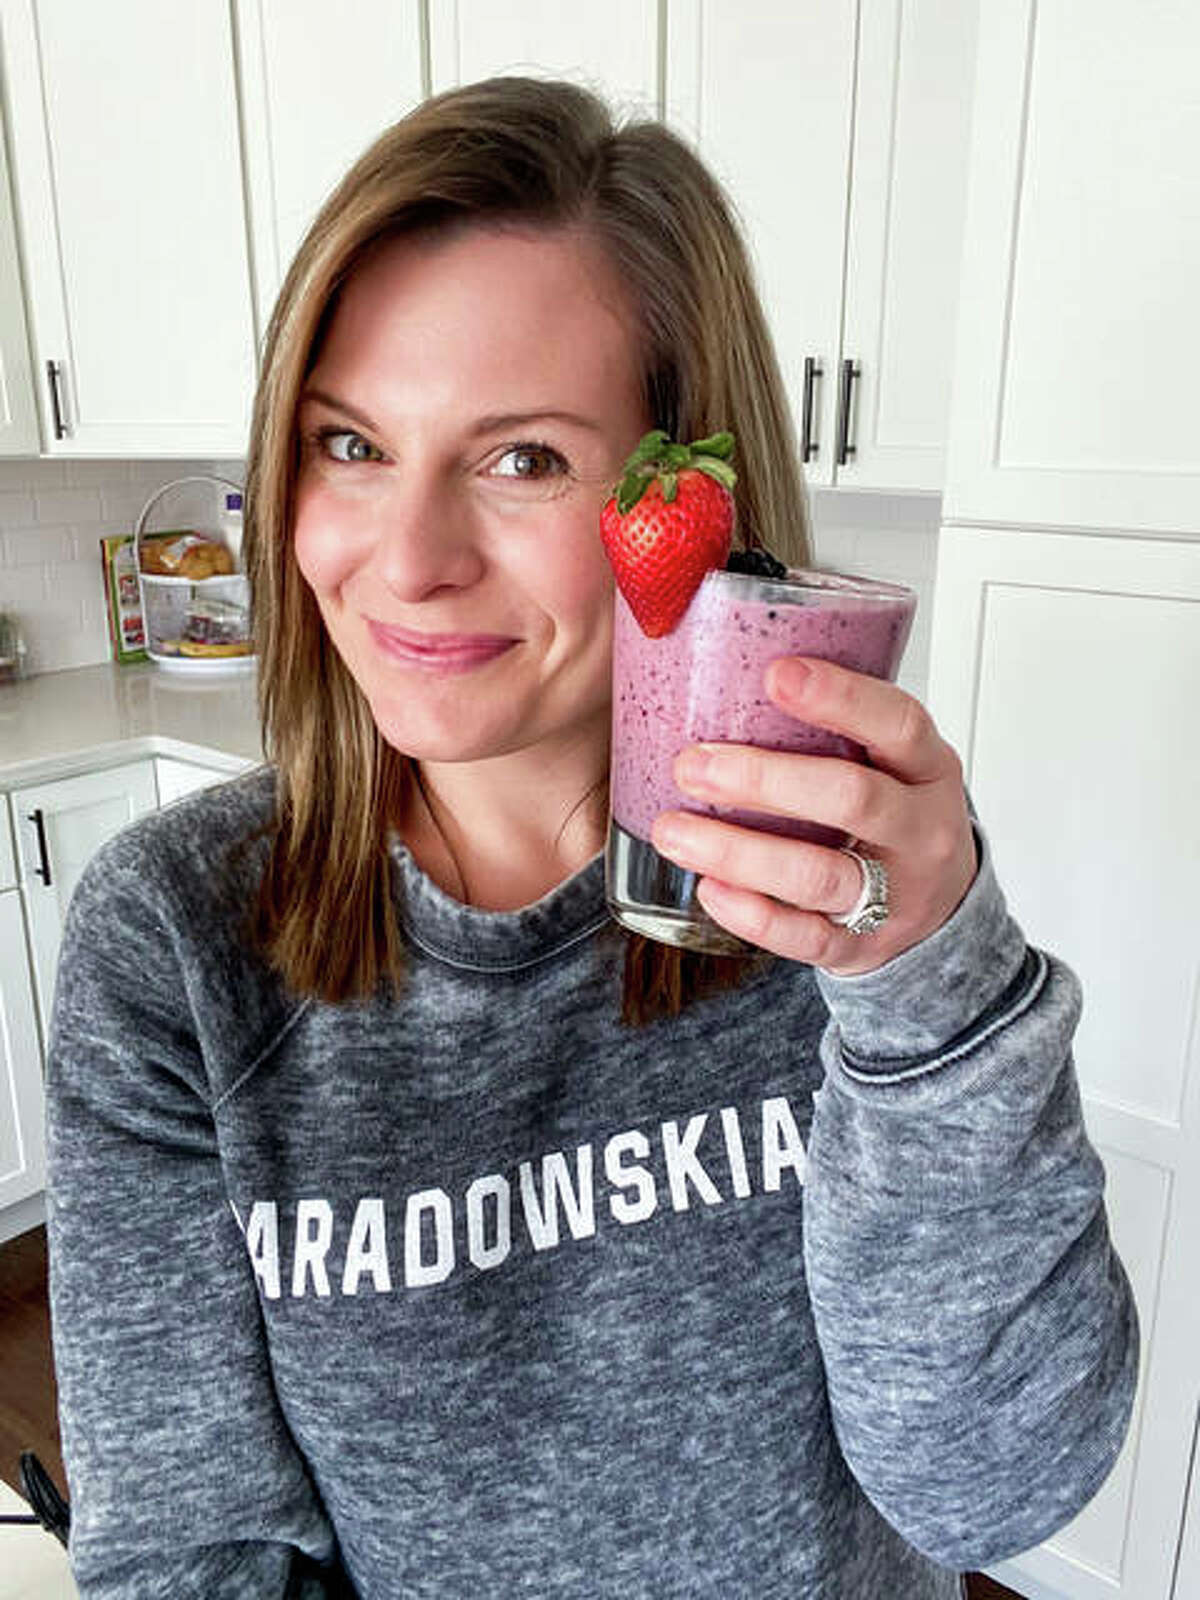 Recipes with Rachel creator Rachel Tritsch shows off her smoothie, which she says she uses as a quick way to fuel up.